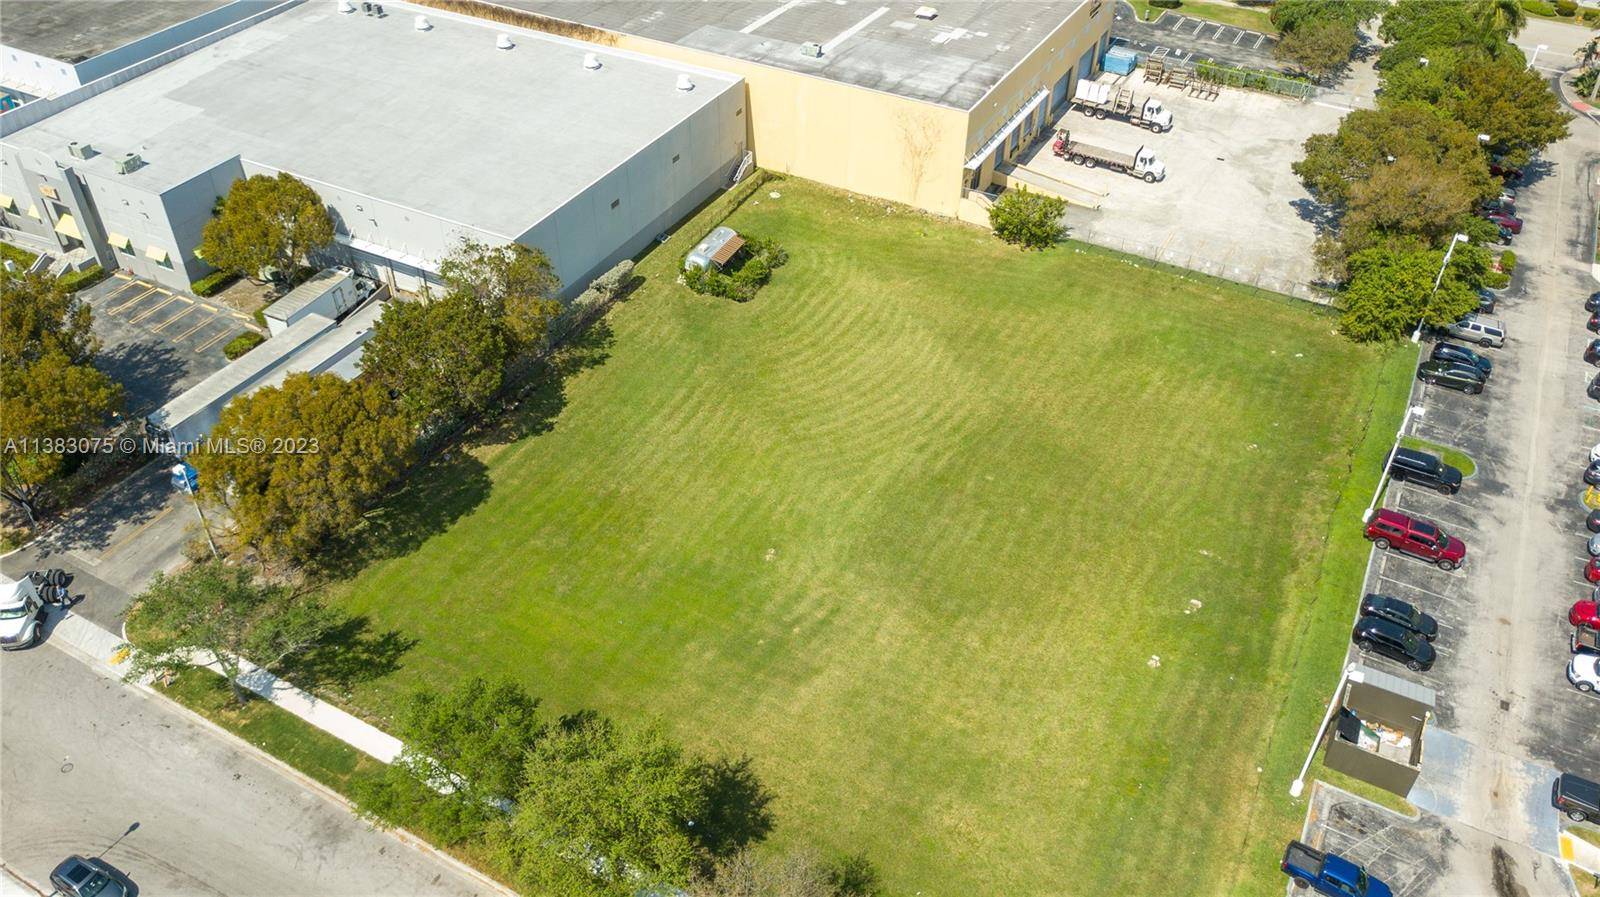 1. 09 Acres vacant lot for sale in Doral, FL 33172.